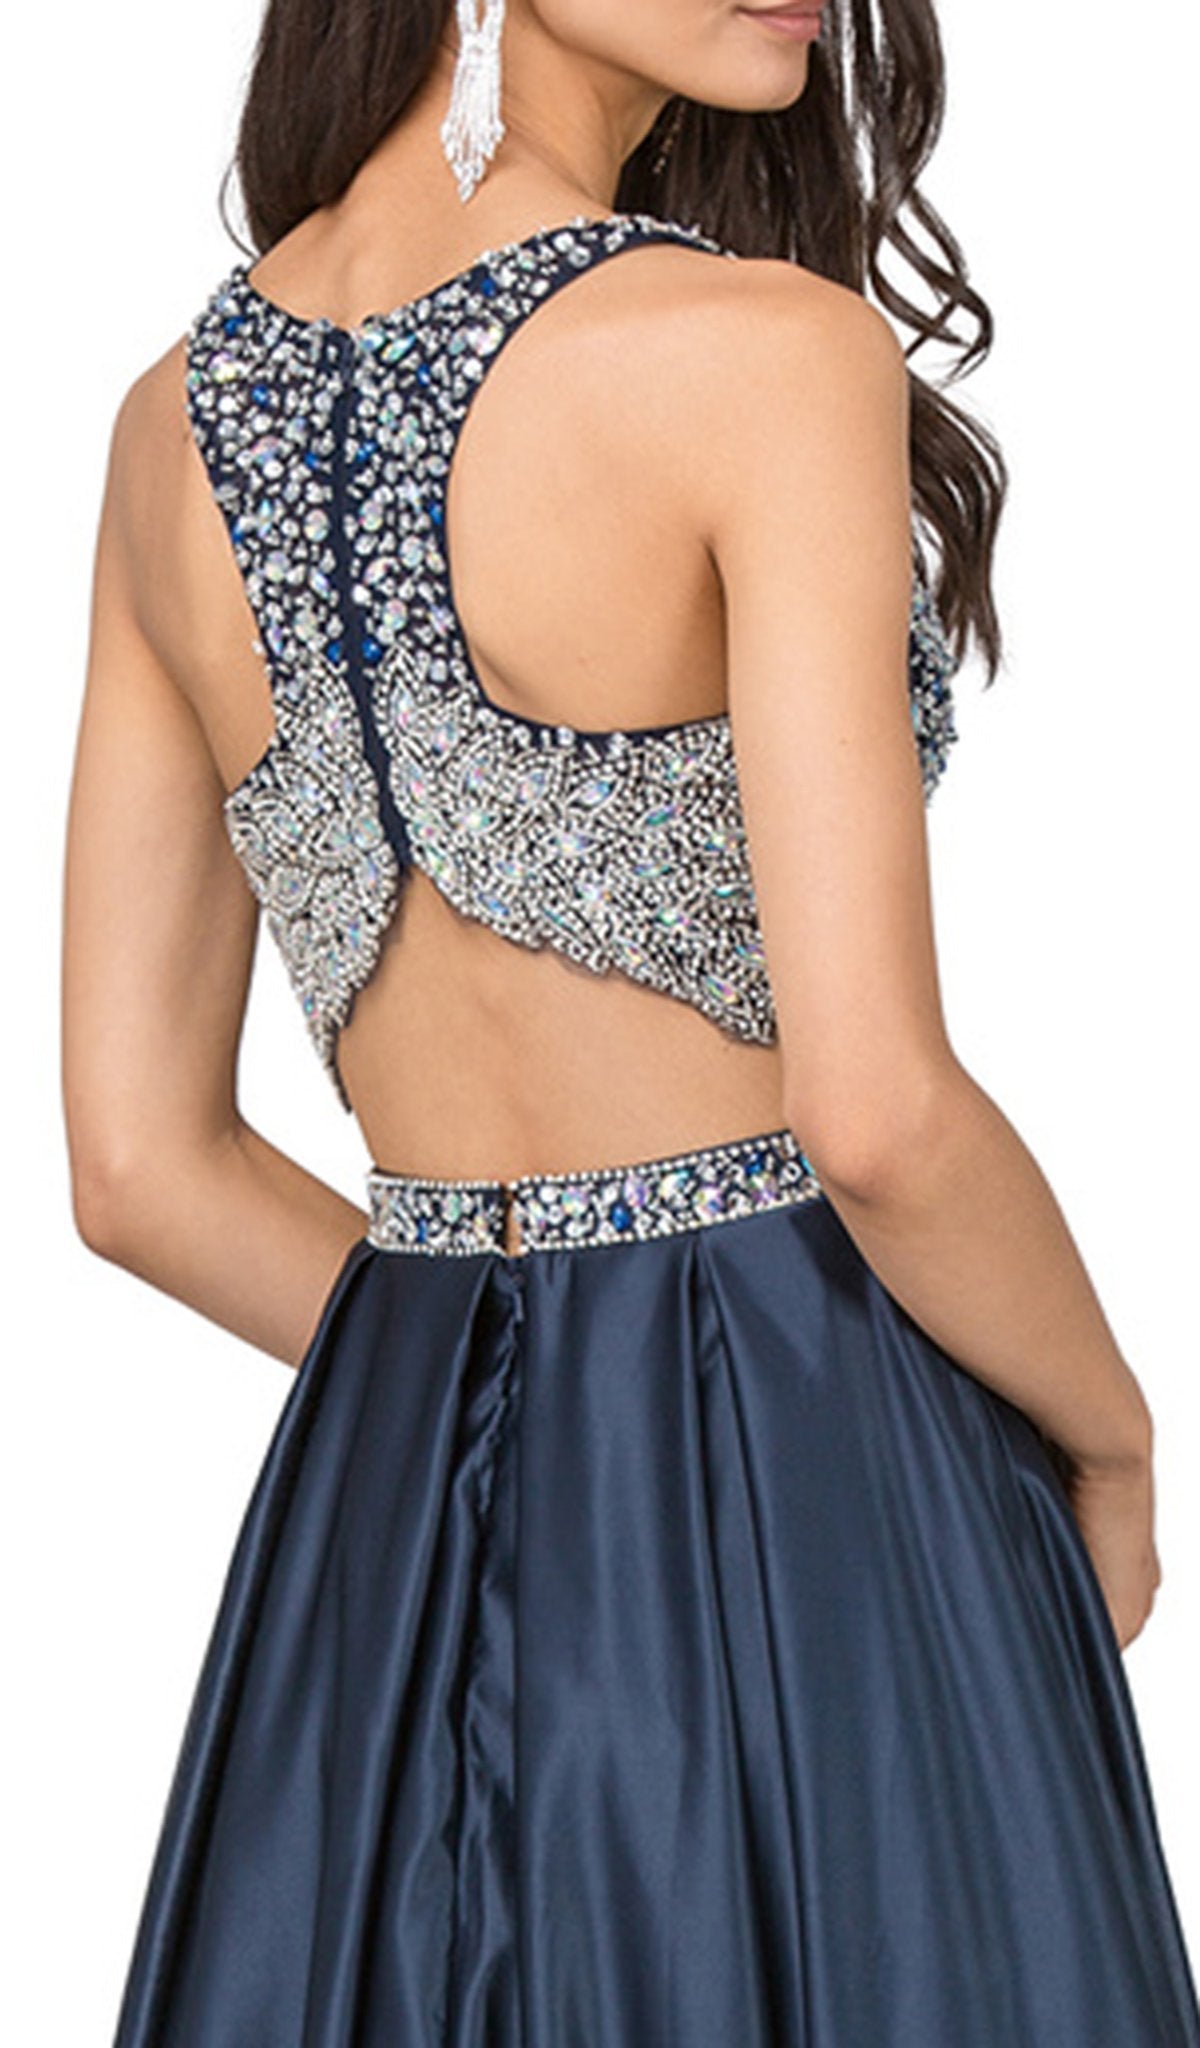 Dancing Queen - 2243 Two Piece Bejeweled A-line Prom Dress Special Occasion Dress L / Navy